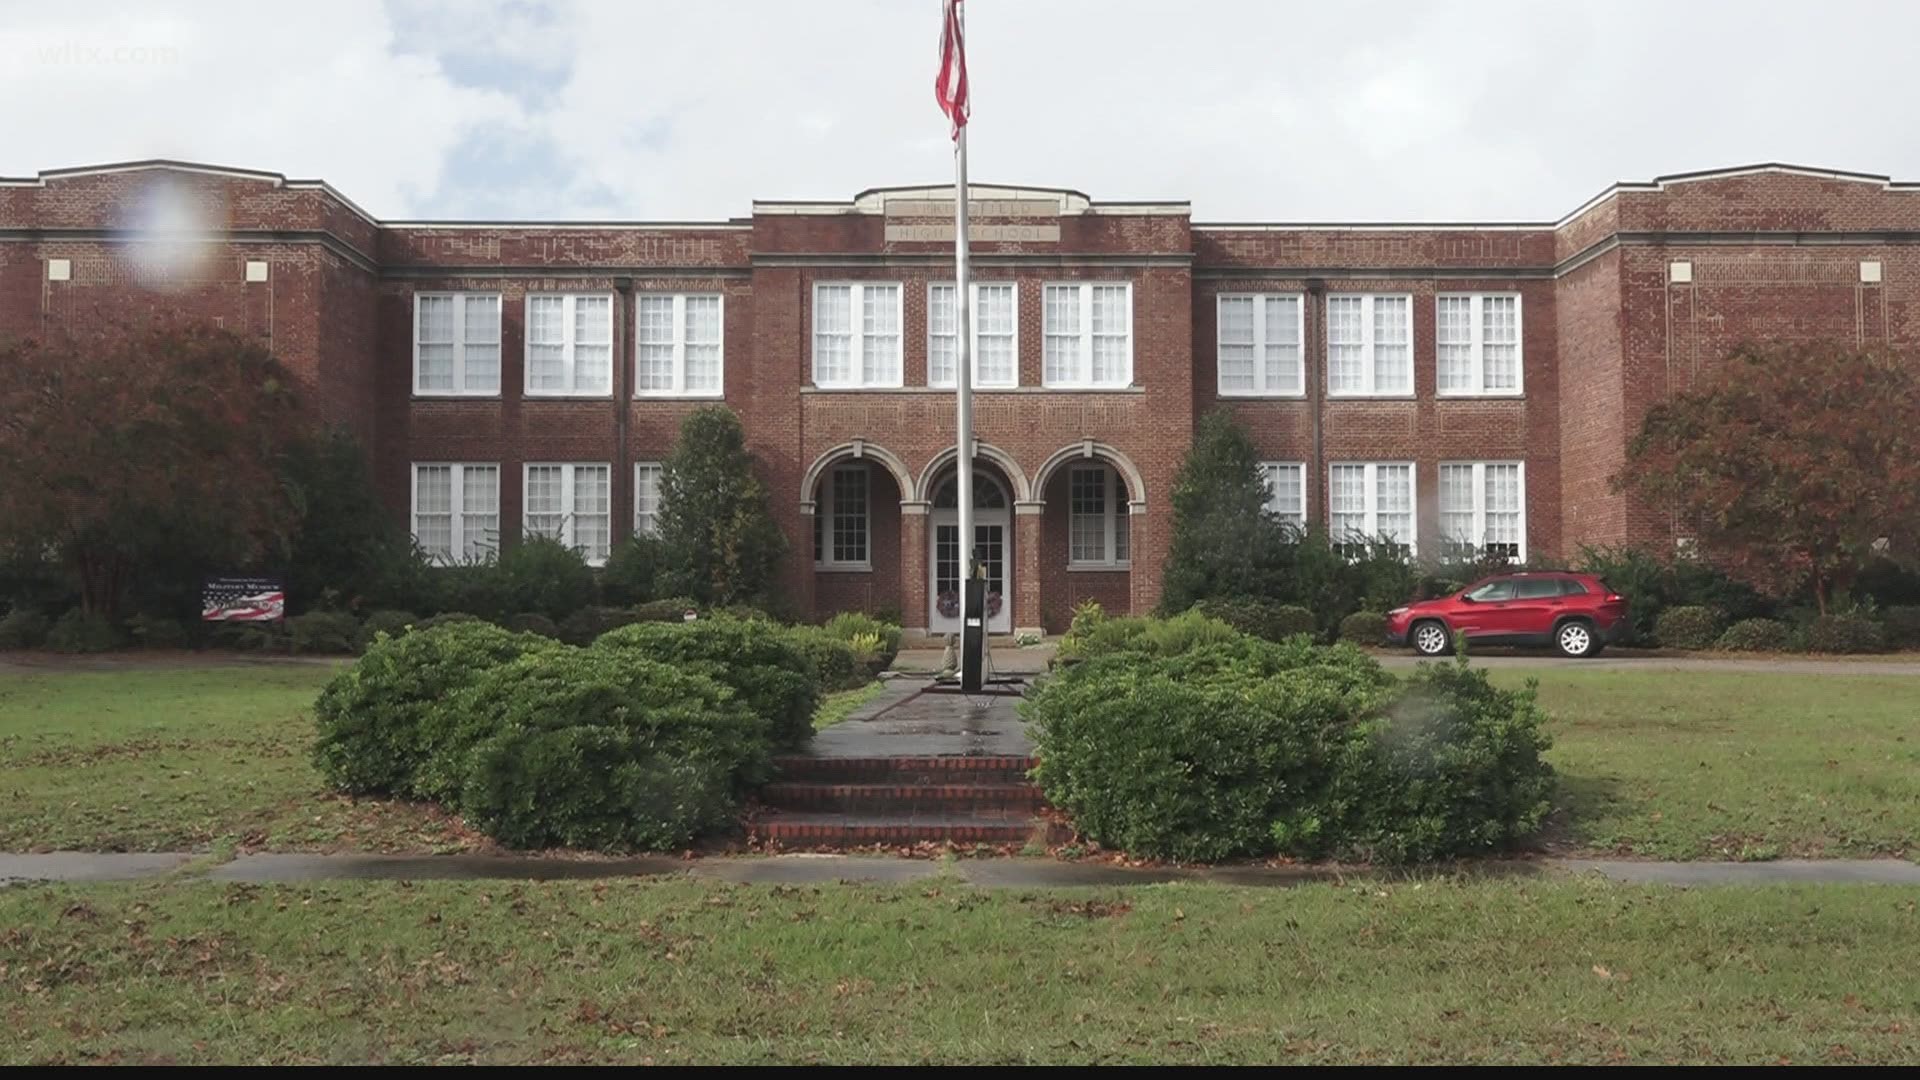 A former high school is still a place of learning in Springfield that is now the Orangeburg County Military Museum.